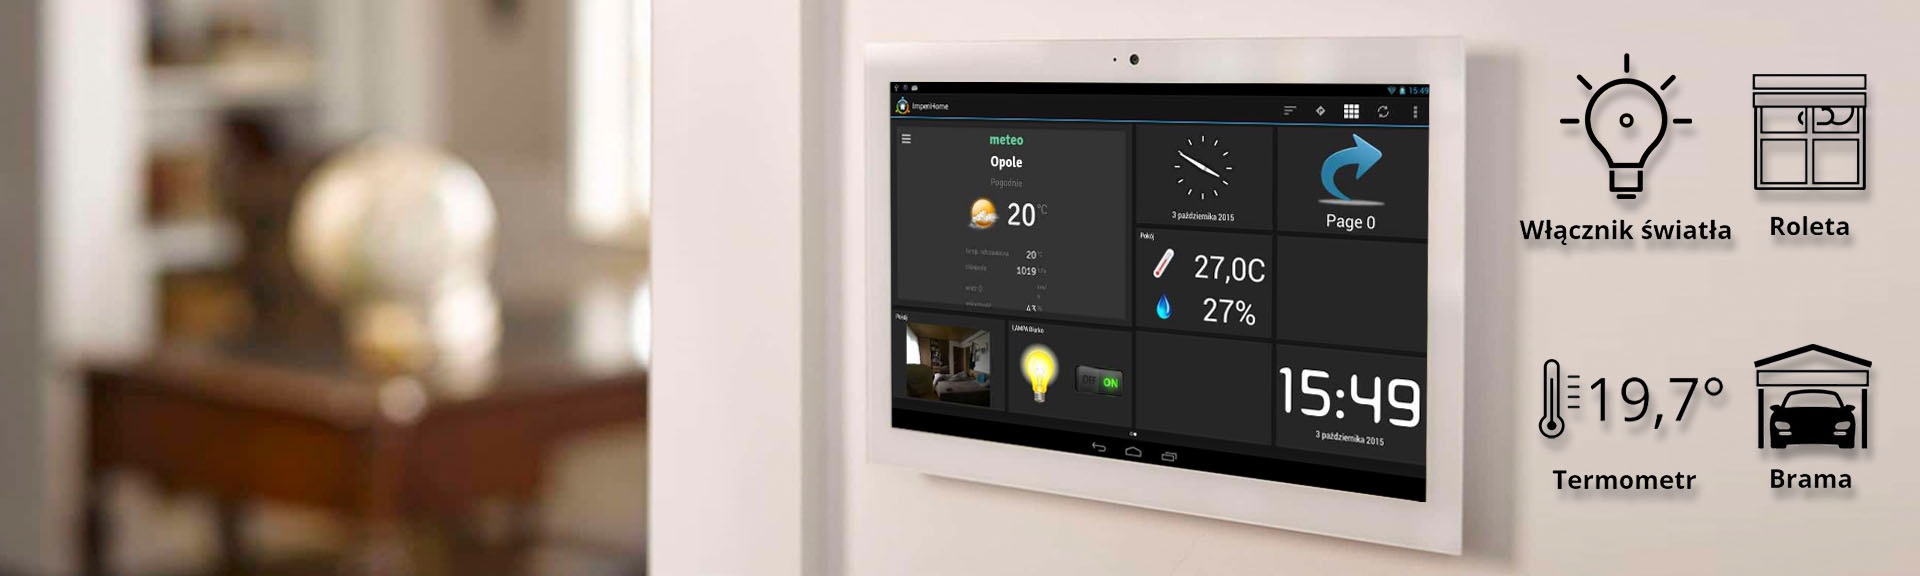 Systemy Smart Home